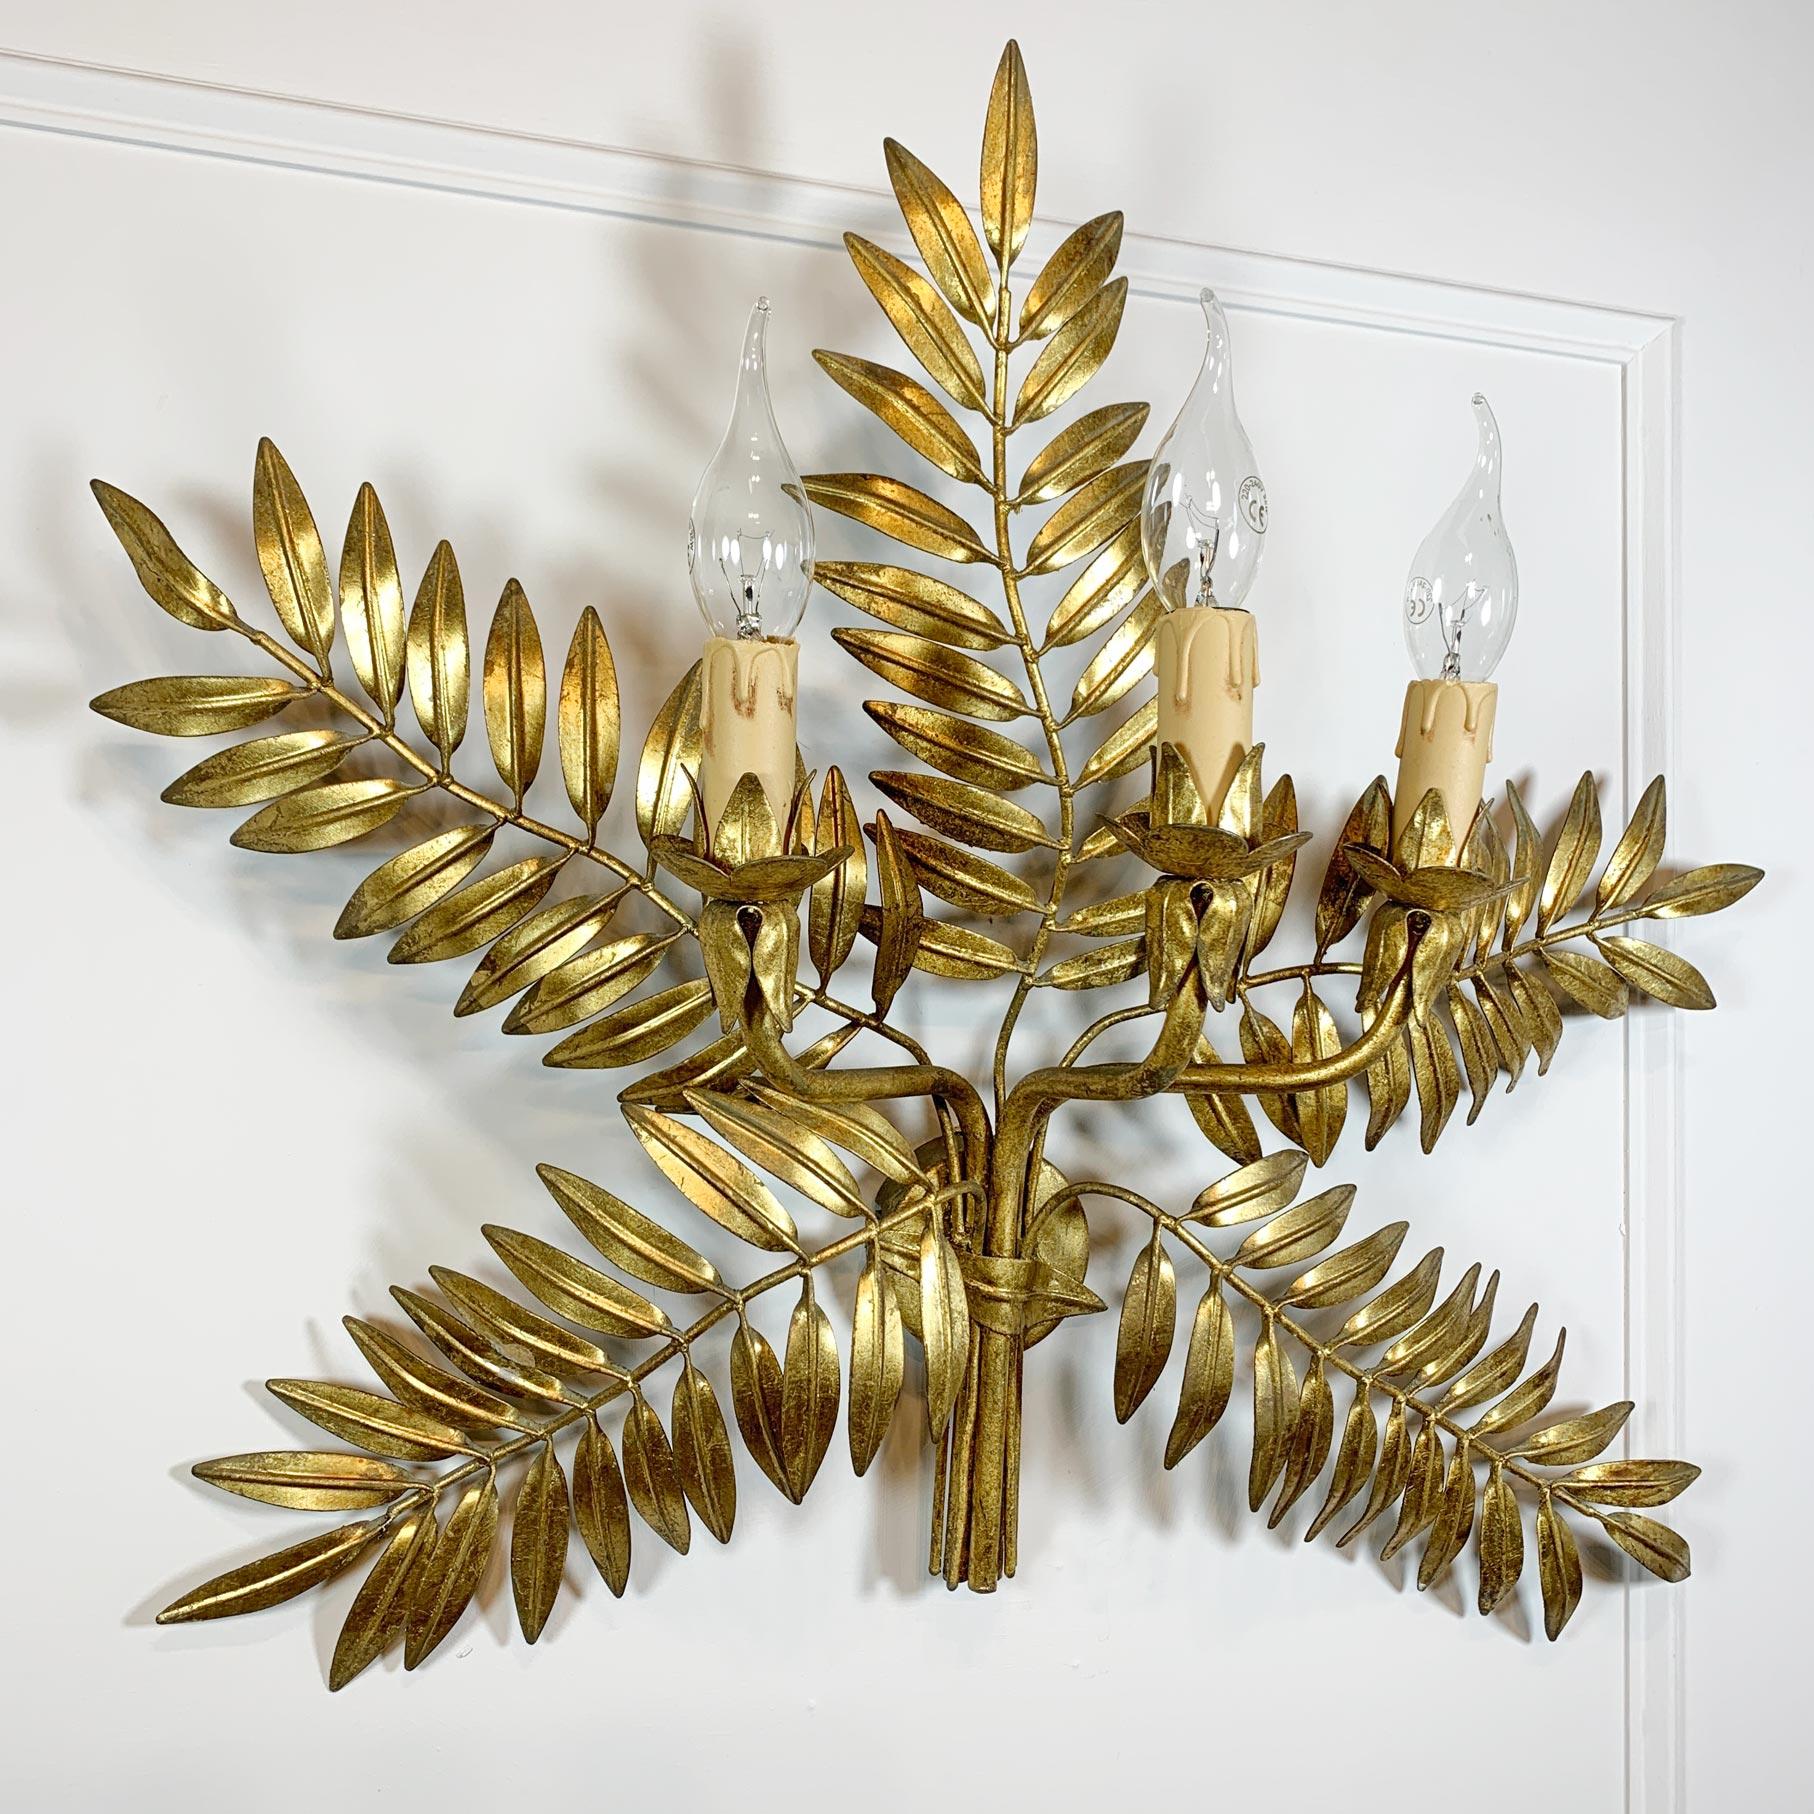 An exceptional 1950s Italian laurel leaf wall light in gold leaf gilt finish. The light has three lamp holders, each taking a single e14 (small screw in bulb)



The gilt finish is in stunning condition and the light radiates gold even when not